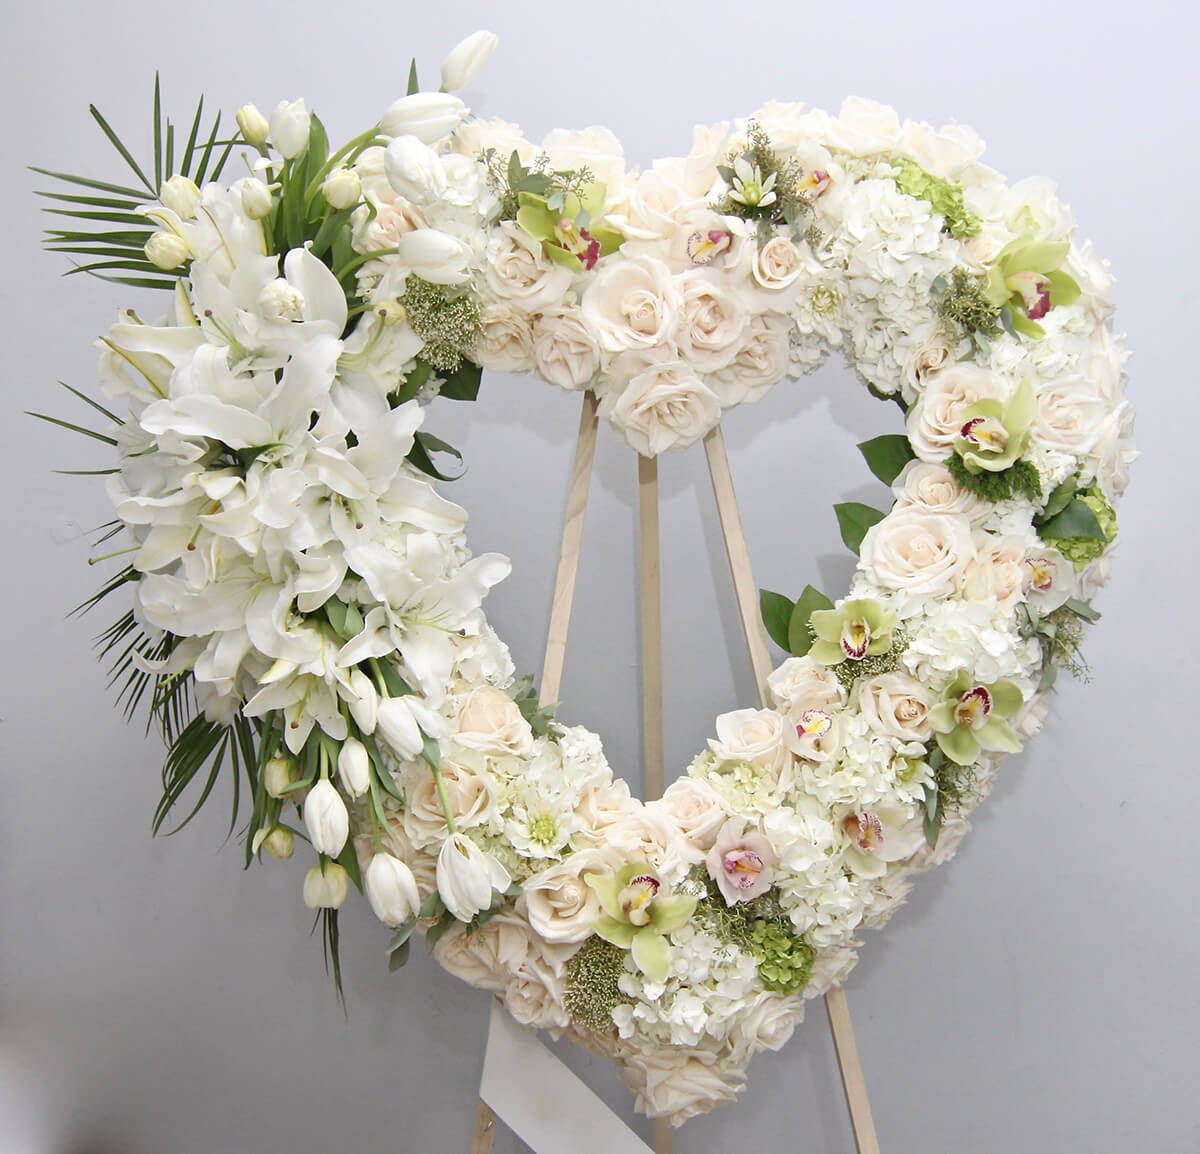 Charming Heart of White and Pink Flowers